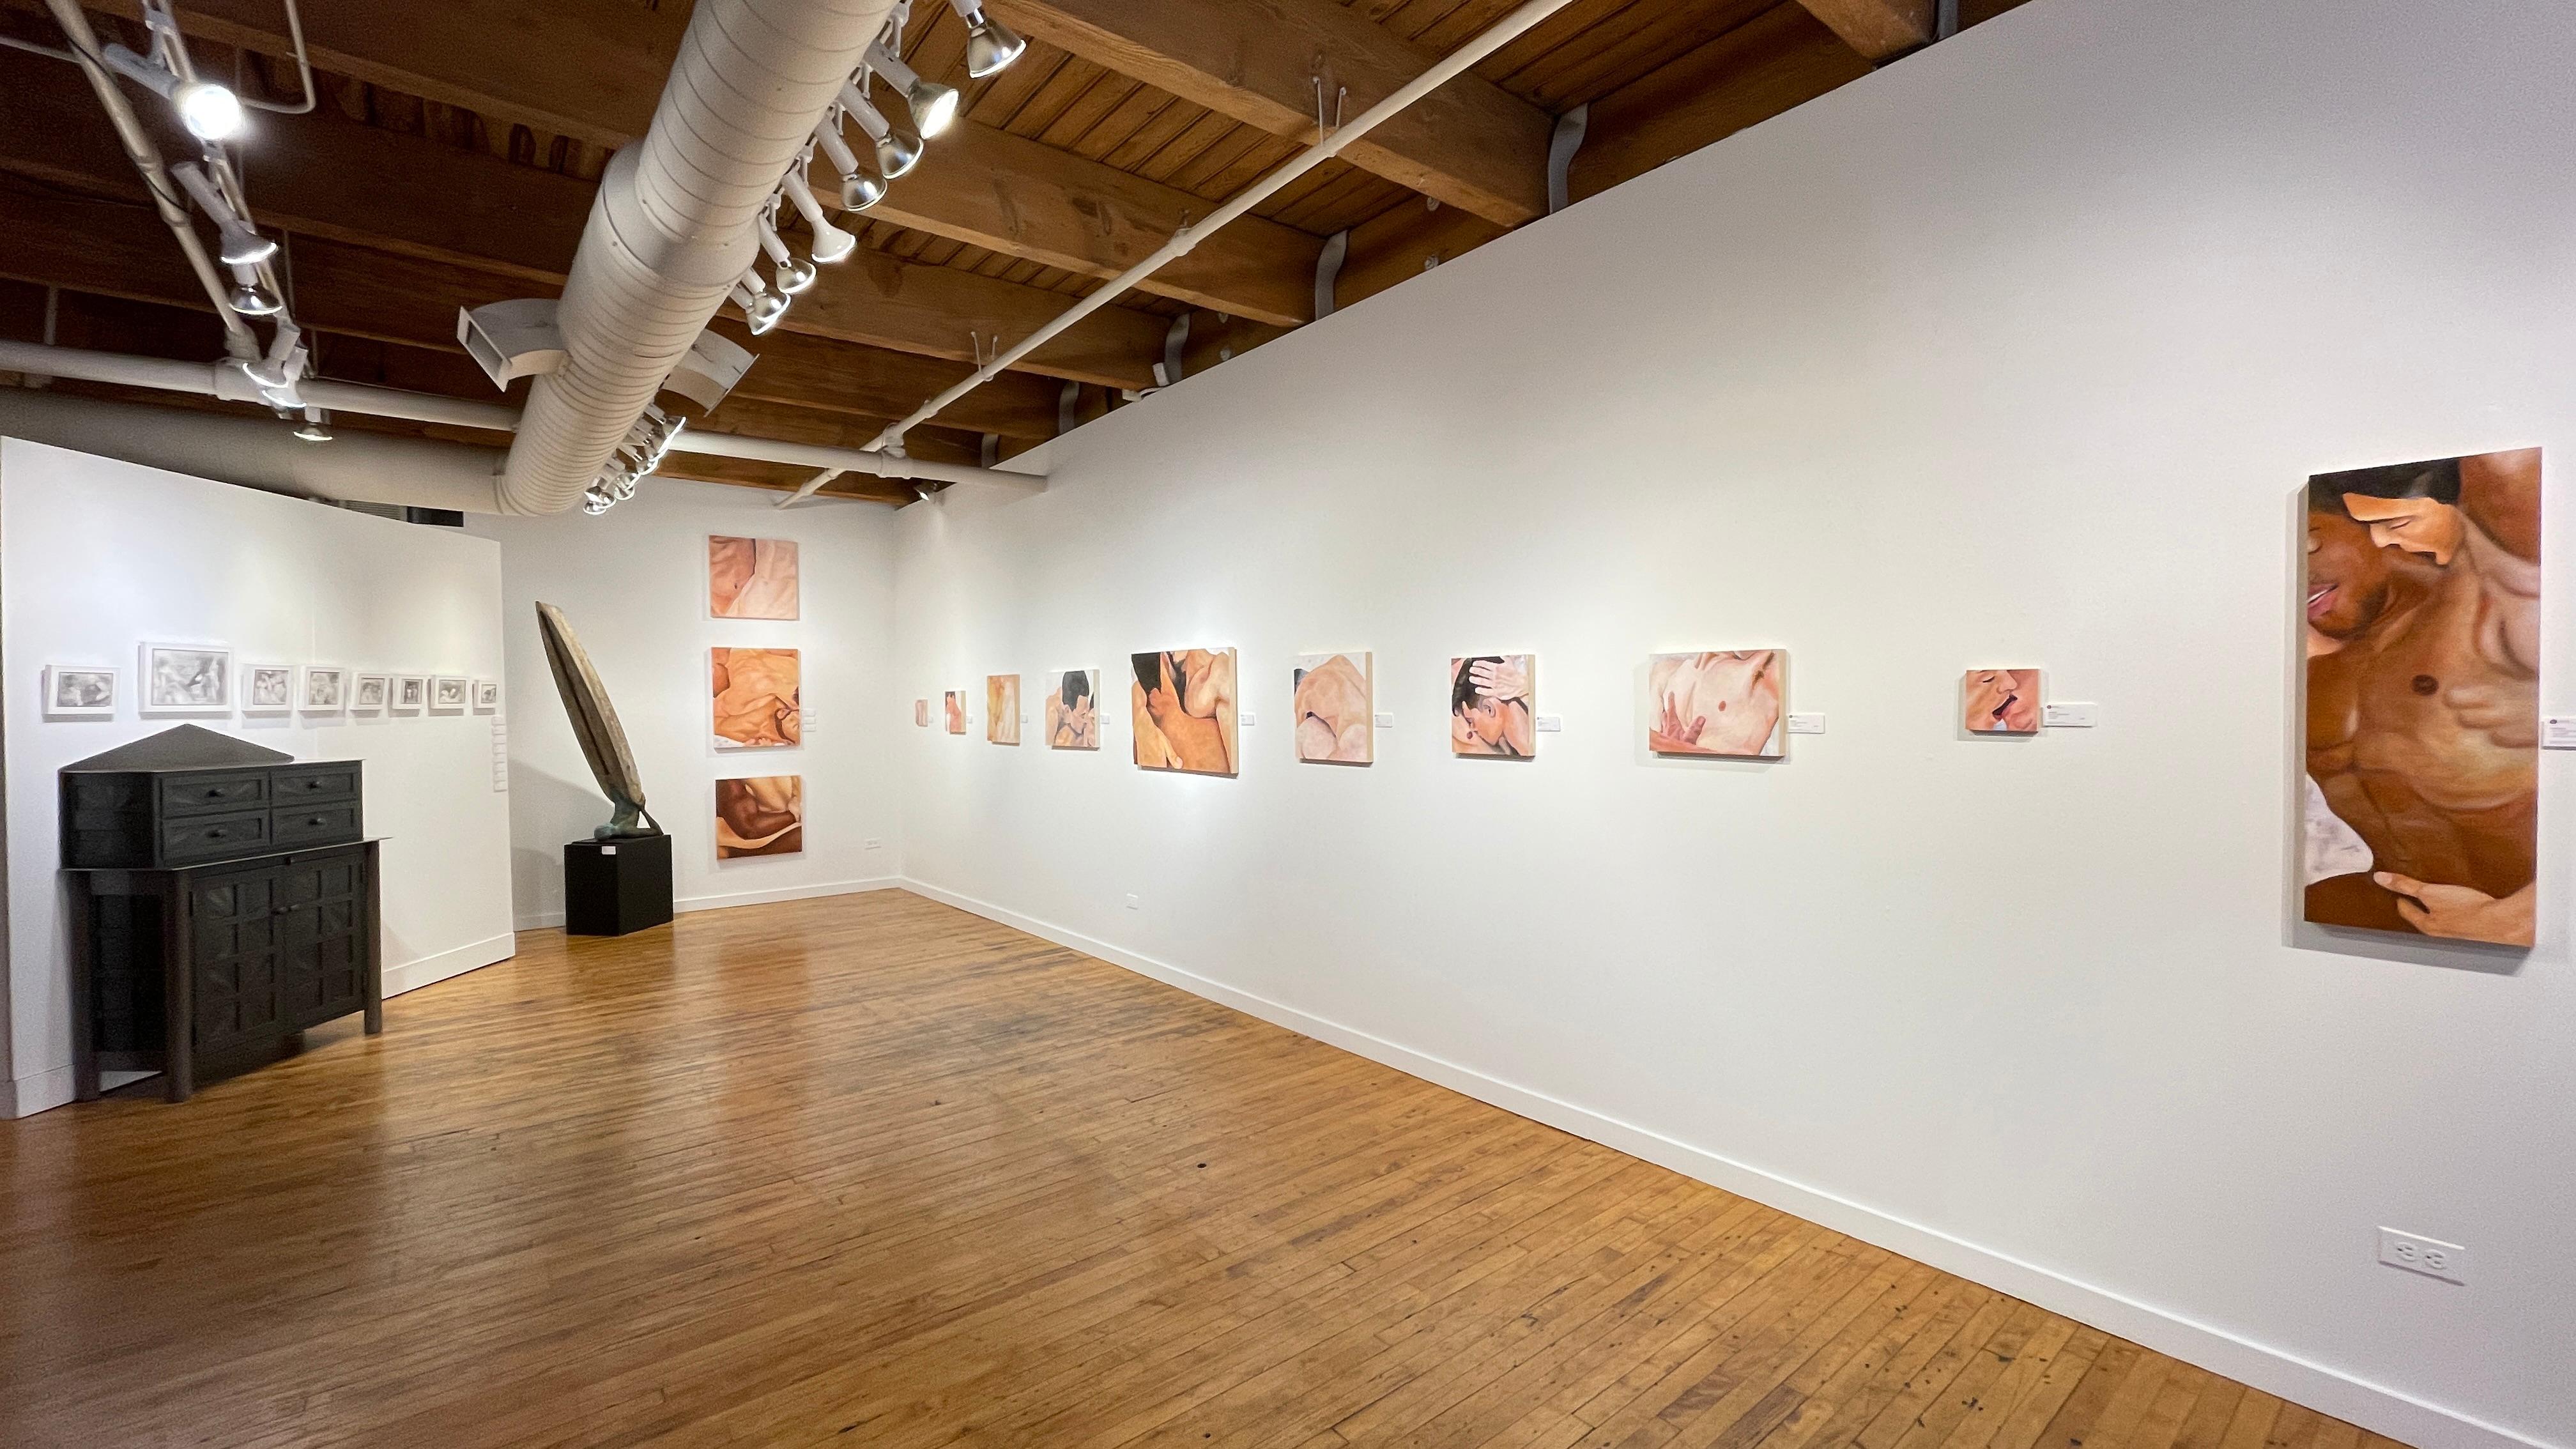 Using pornography as a vehicle for understanding, Rick Sindt's work explores the discovery and development of queer attraction. Sindt transforms pornographic stills, repurposing them into images of intimacy.

Rick Sindt
And Then On To You
oil on